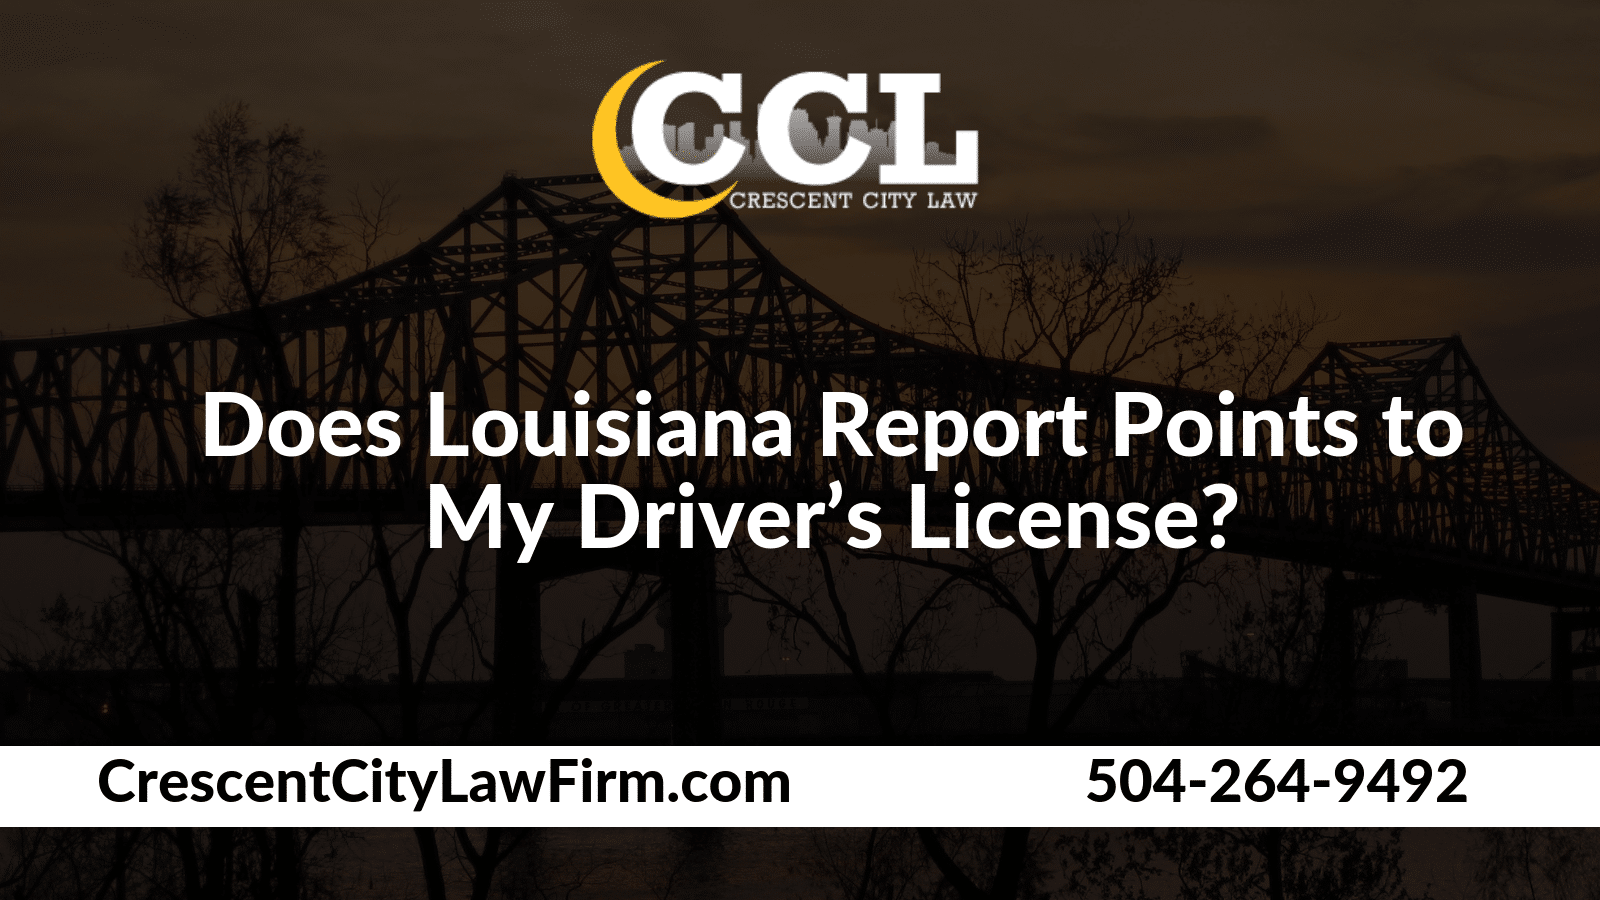 Does Louisiana Report Points to My Driver’s License? Crescent City Law